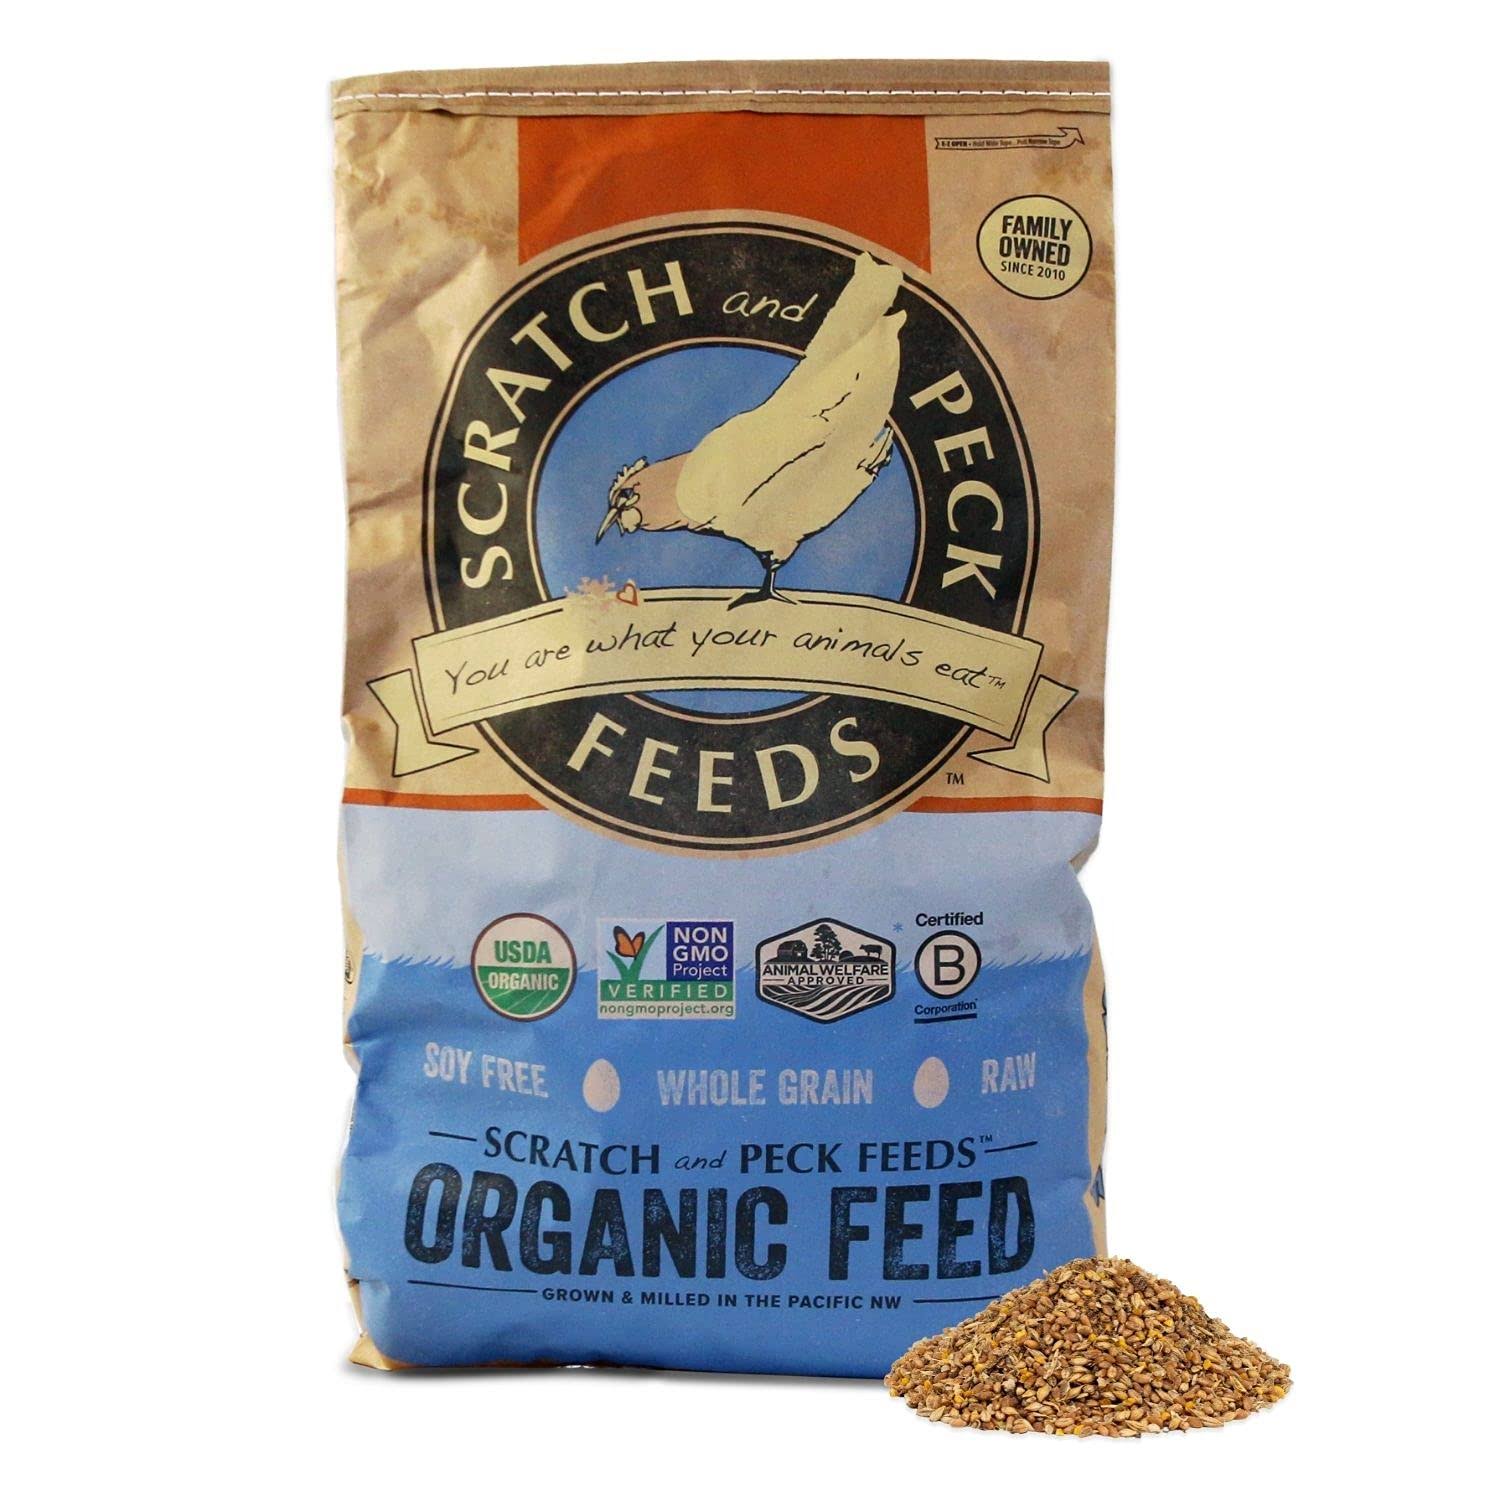 Scratch and Peck Feeds Organic Layer with Corn 16% Poultry FEED, 40-lb Bag